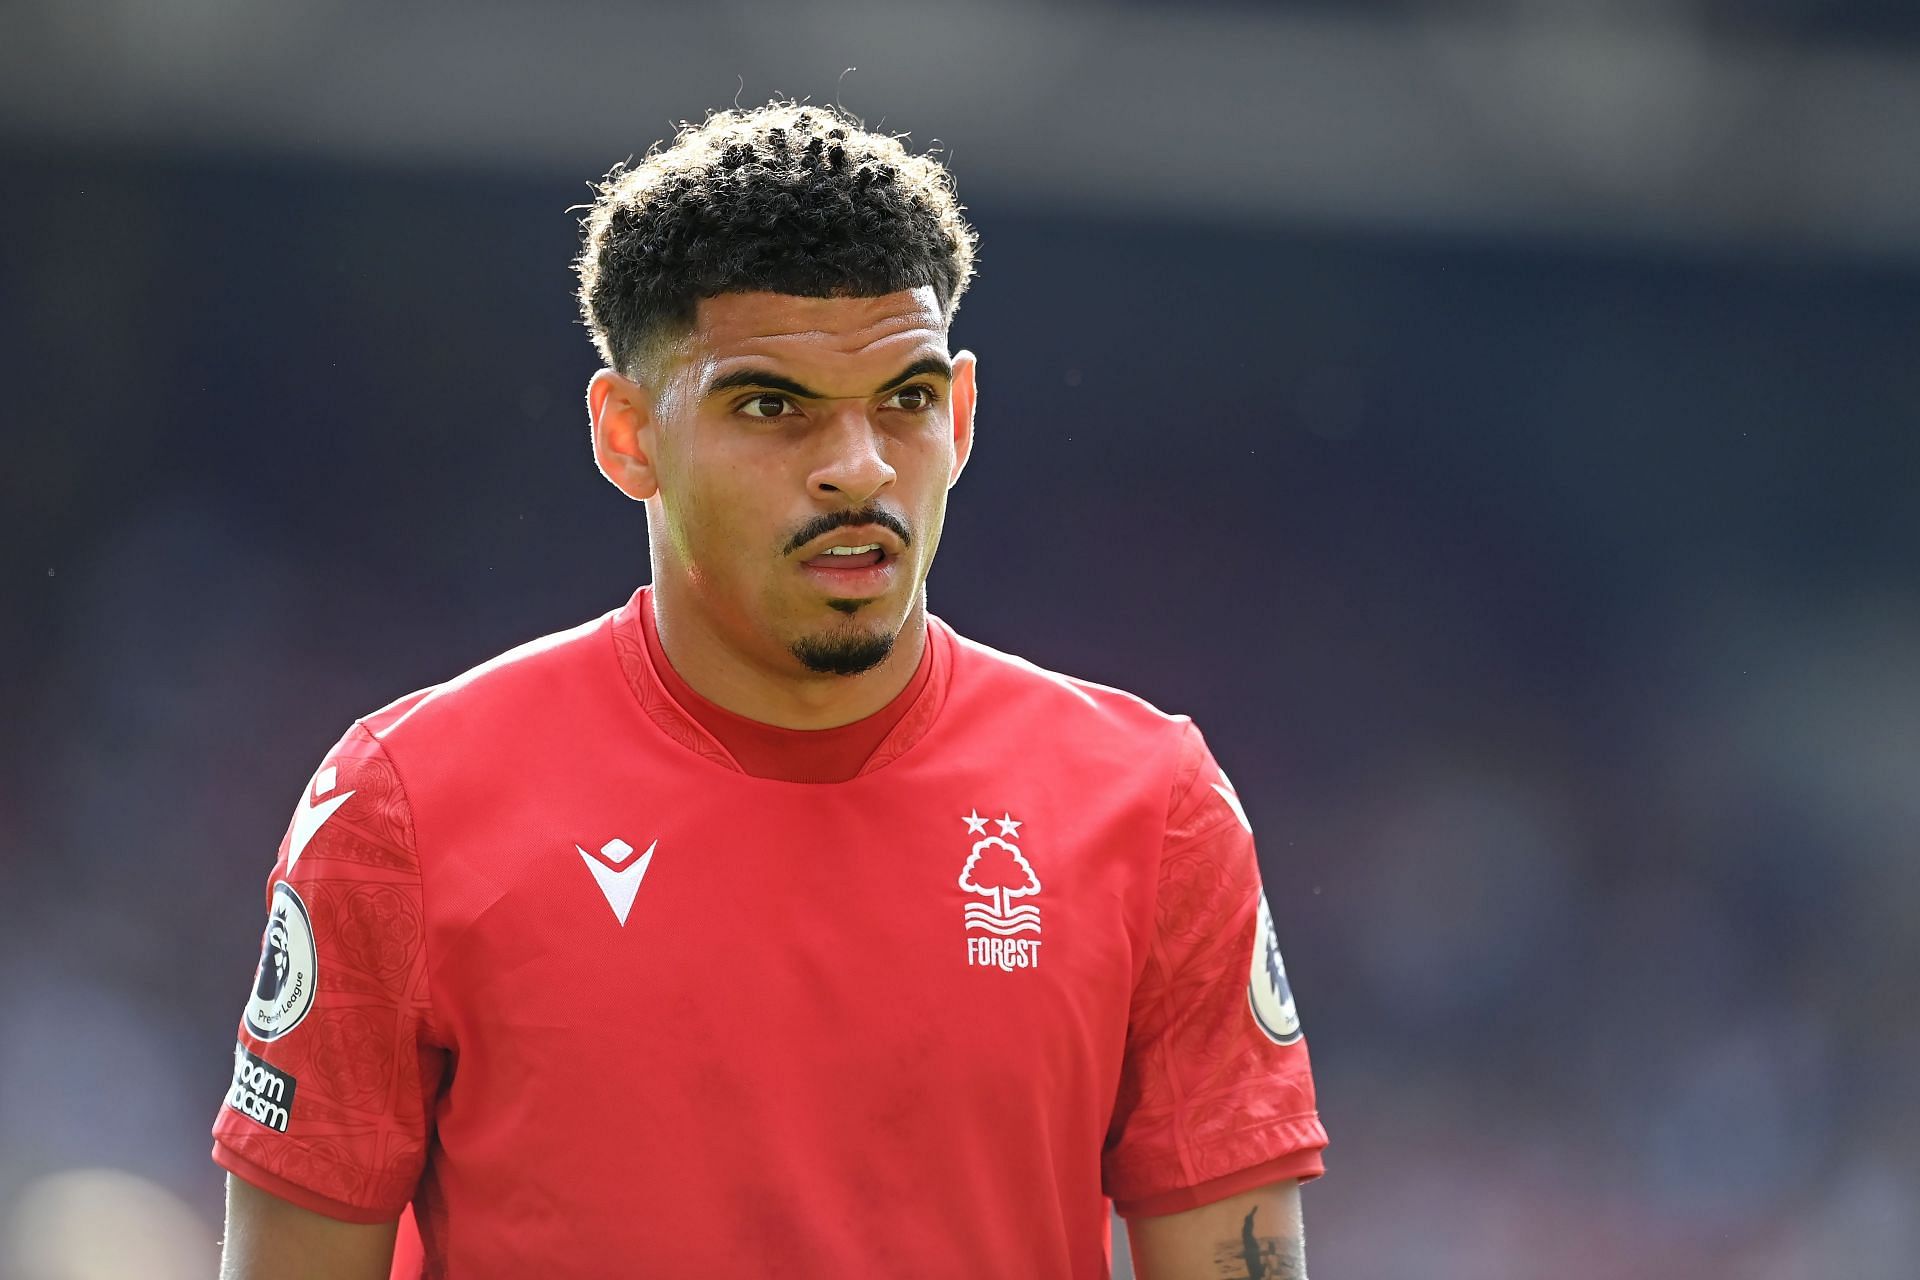 Nottingham Forest broke their record to sign Morgan Gibbs-White